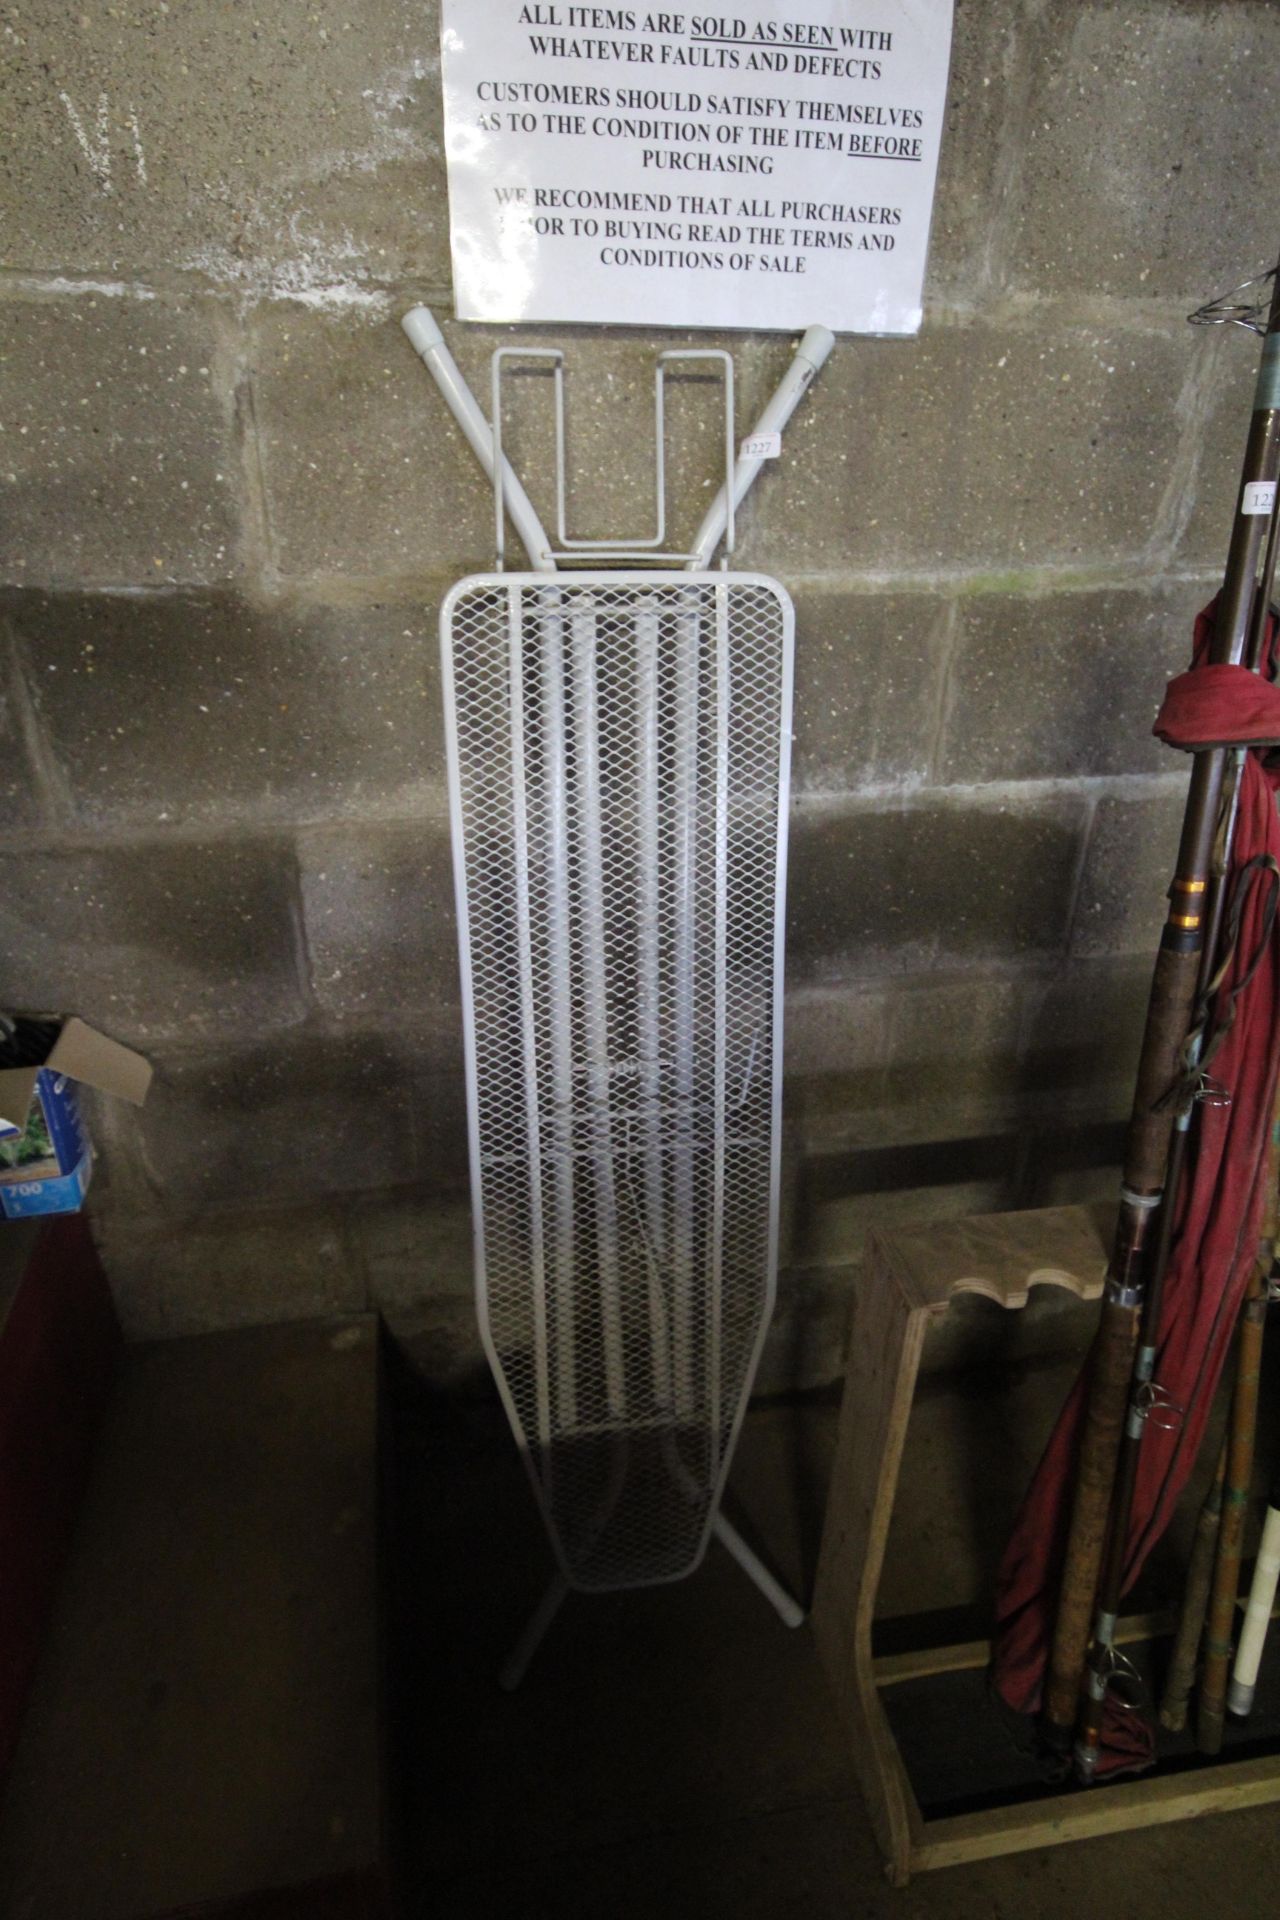 A metal ironing board lacking cover